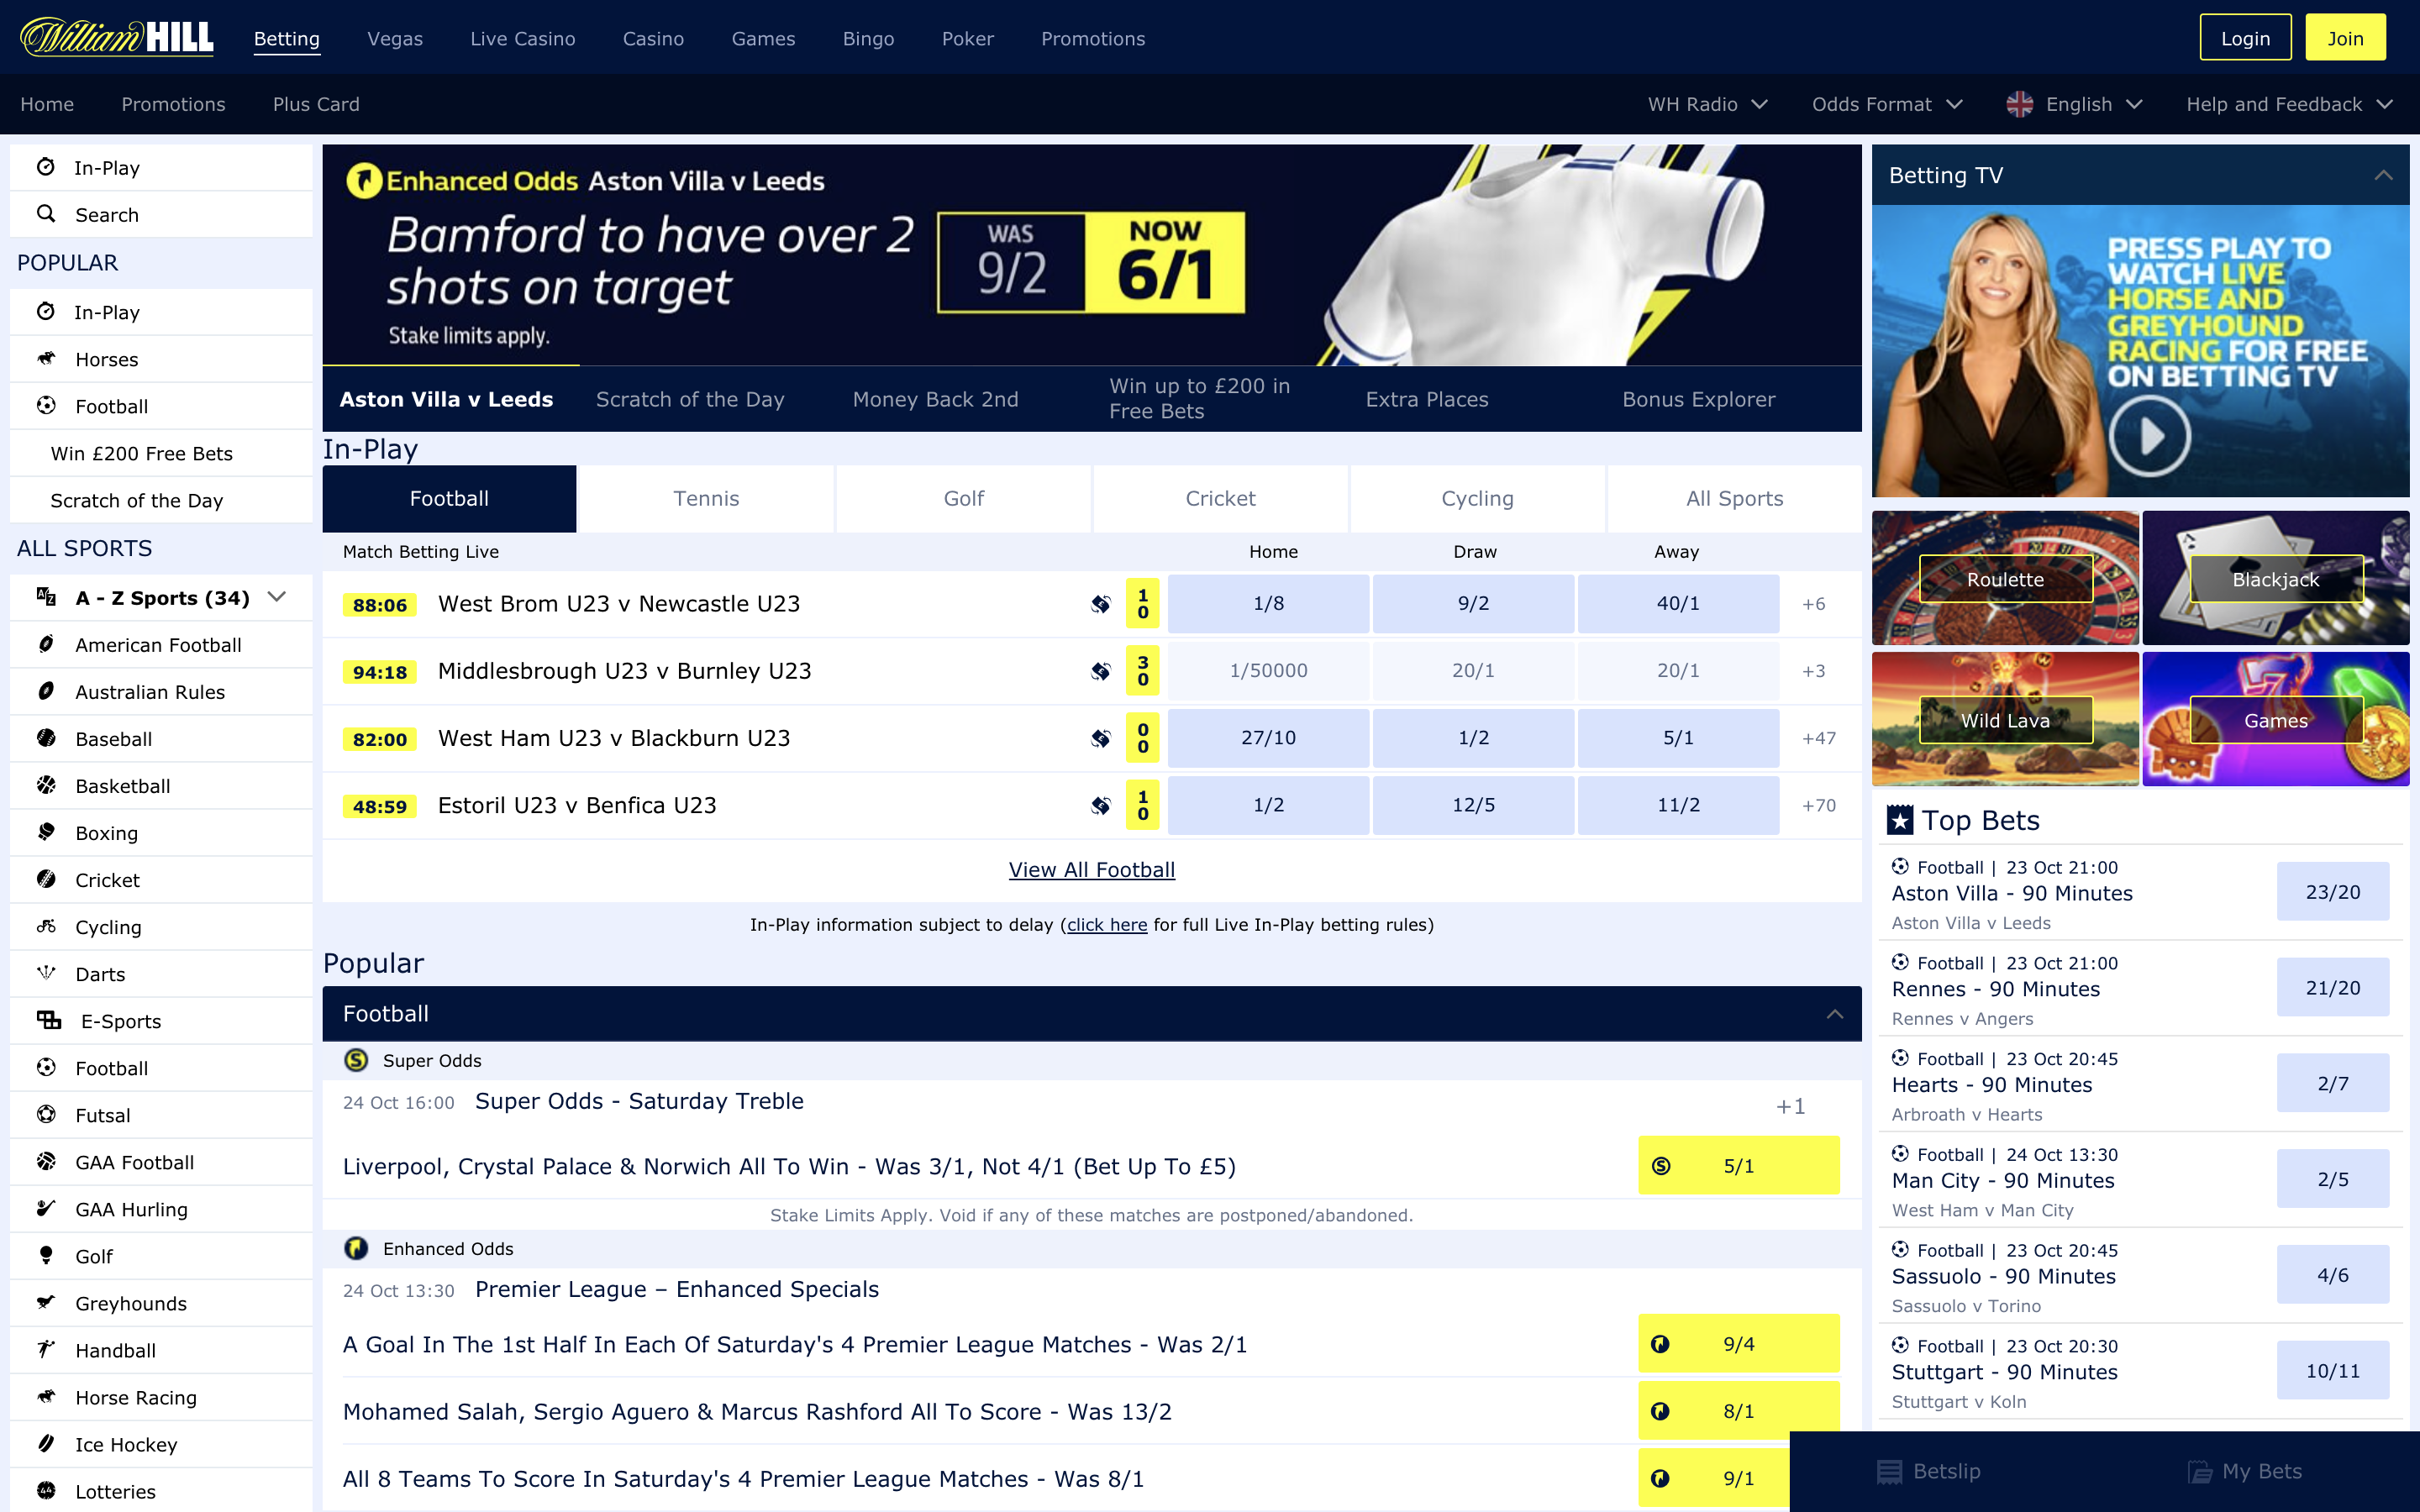 William Hill sign up offer (bet £10 get £30) + full review